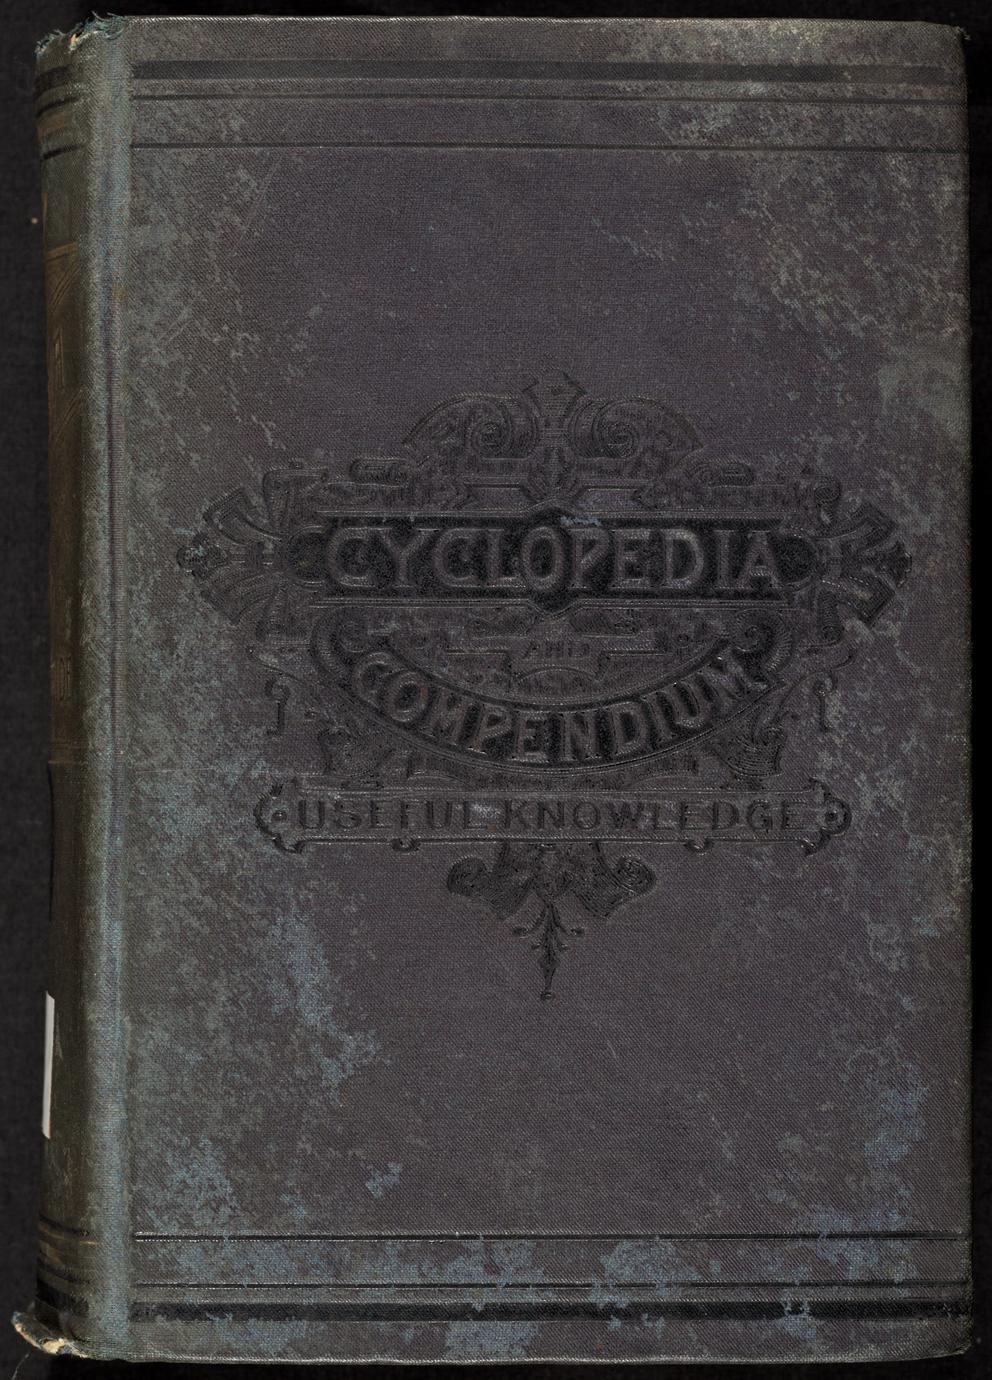 Willis' family cyclopedia and Alabama general business guide : giving all the statutes, and every rule, regulation, and usage of the state of Alabama, as respects property and person, laws, moneys, and things in action (1 of 3)